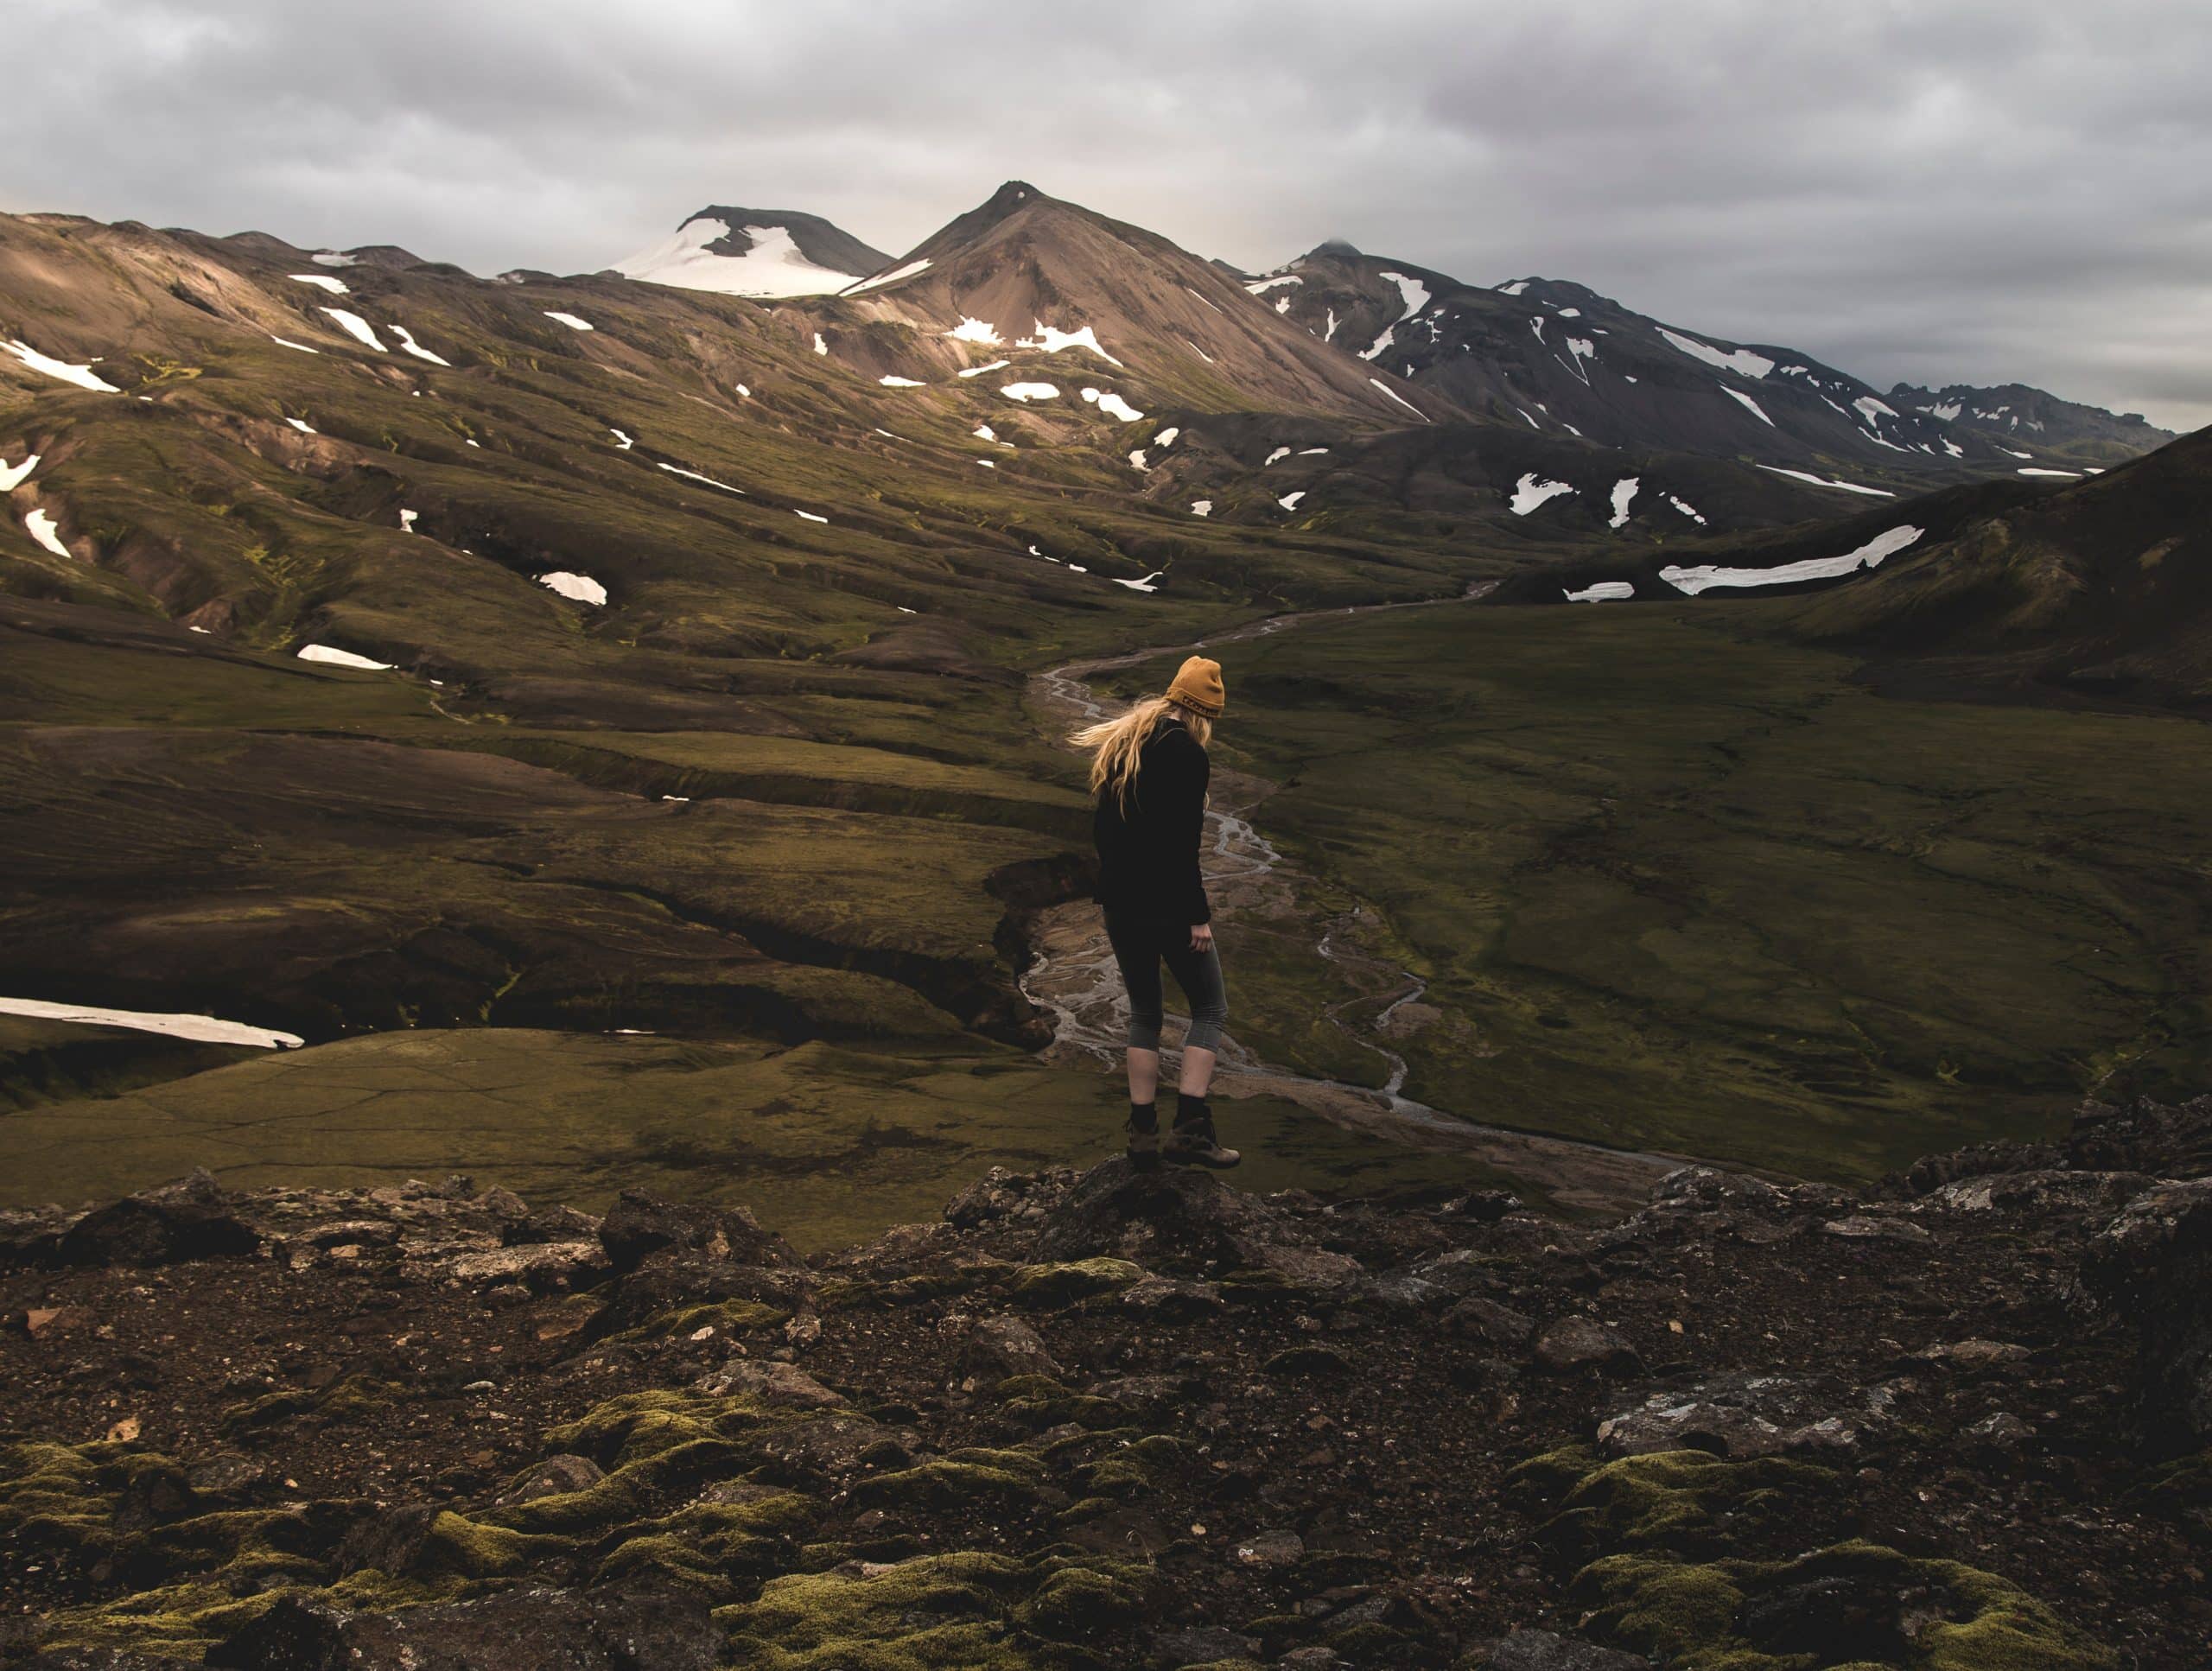 A woman hiking in Iceland's highlands.